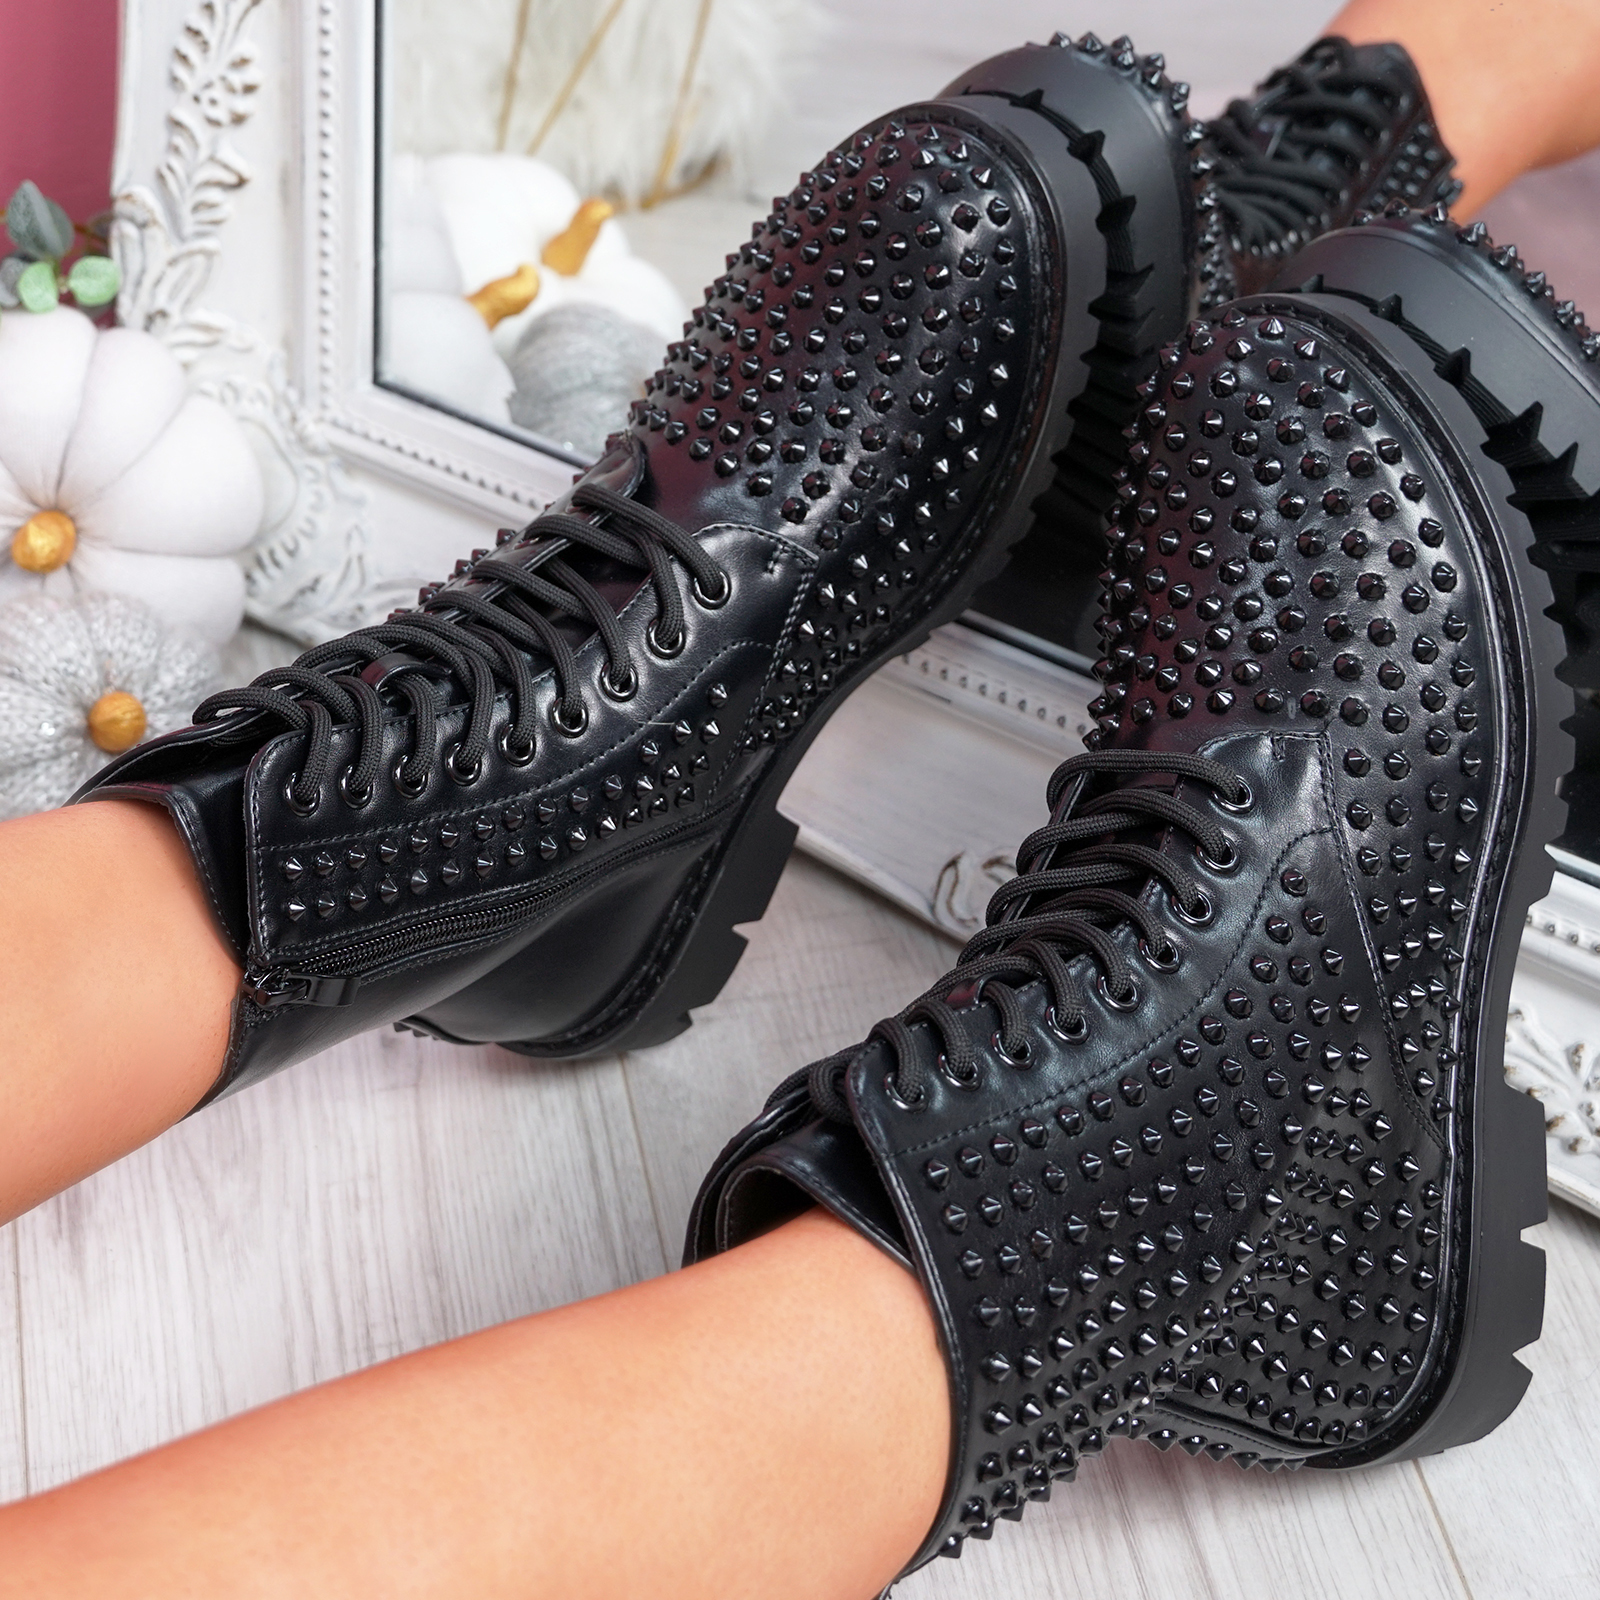 WOMENS LADIES SPIKE STUDS ANKLE BOOTS BIKER LACE UP ZIP PUNK WOMEN ANKLE SHOES